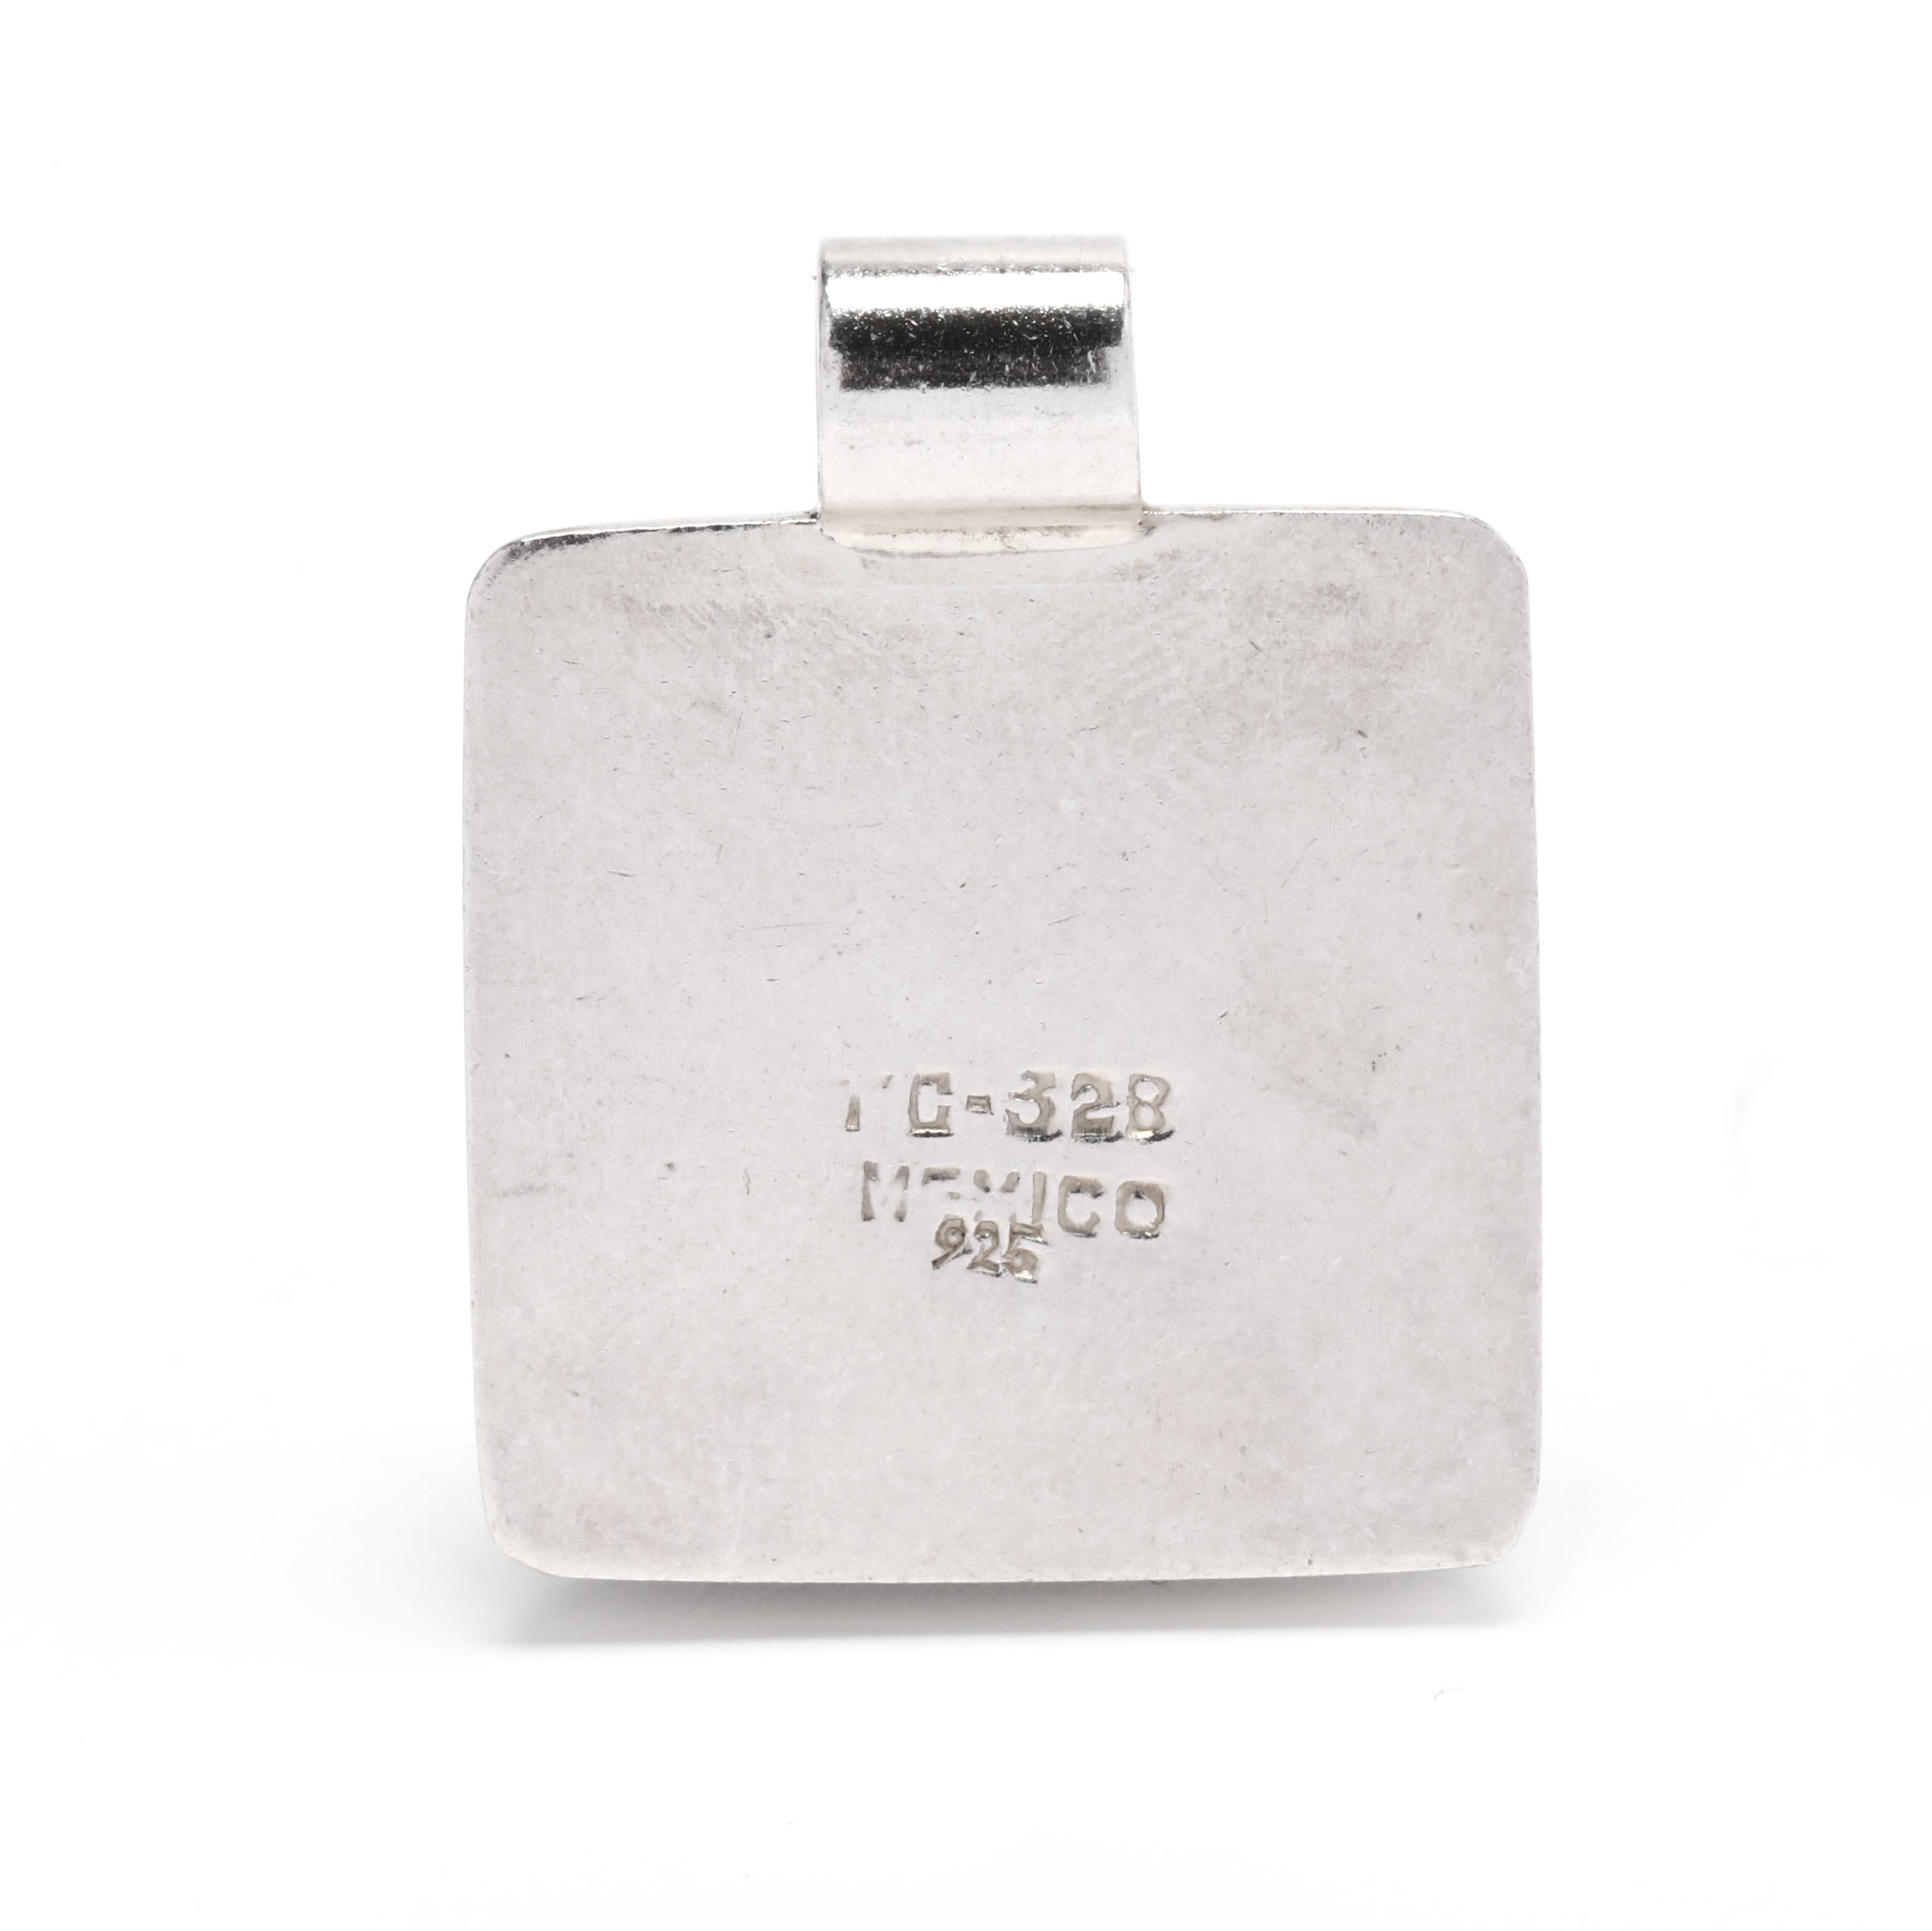 This stunning square onyx pendant is made of sterling silver and measures 1.25 inches in size. Its geometric design makes it an eye-catching piece of jewelry. This pendant is a perfect example of Mexican silver jewelry, with its intricate details